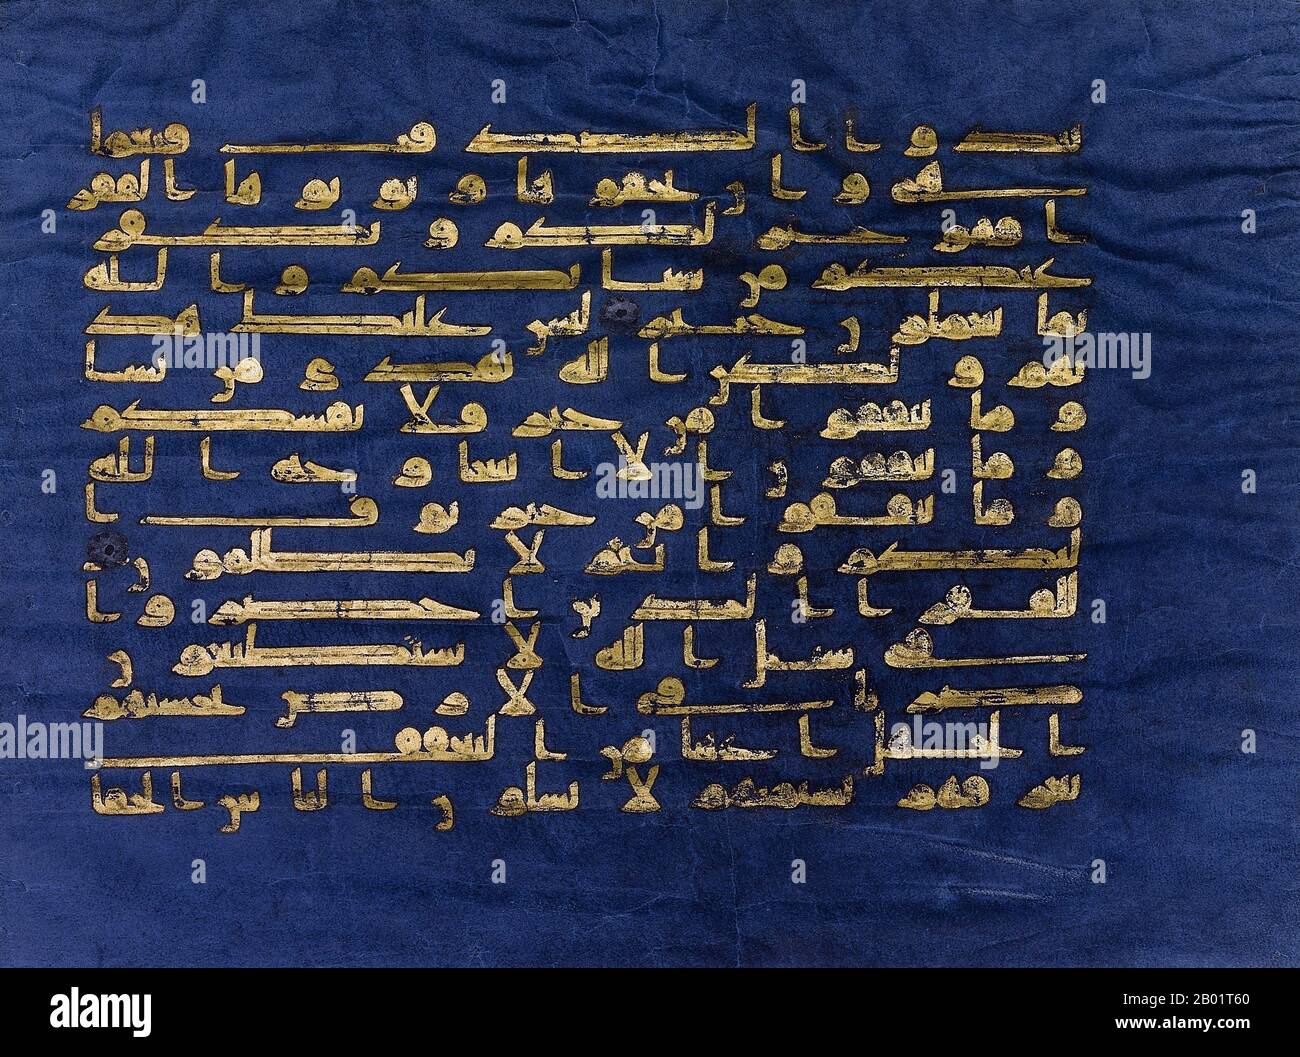 Tunisia: Surah al-Baqarah, verses 197-201, in Kufic script. From the 'Blue Qur'an', Qairawan, Tunisia, c. 1000 CE.  The Blue Qur'an is a late 9th - early 10th century Tunisian Qur'an manuscript in Kufic calligraphy. It is written in gold (chrysography) on parchment died with indigo, a unique aspect. It is among the most famous works of Islamic art, and has been called 'one of the most extraordinary luxury manuscripts ever created'.  The manuscript was dispersed during the Ottoman period; today most of it is located in the National Institute of Art and Archaeology in Tunis. Stock Photo